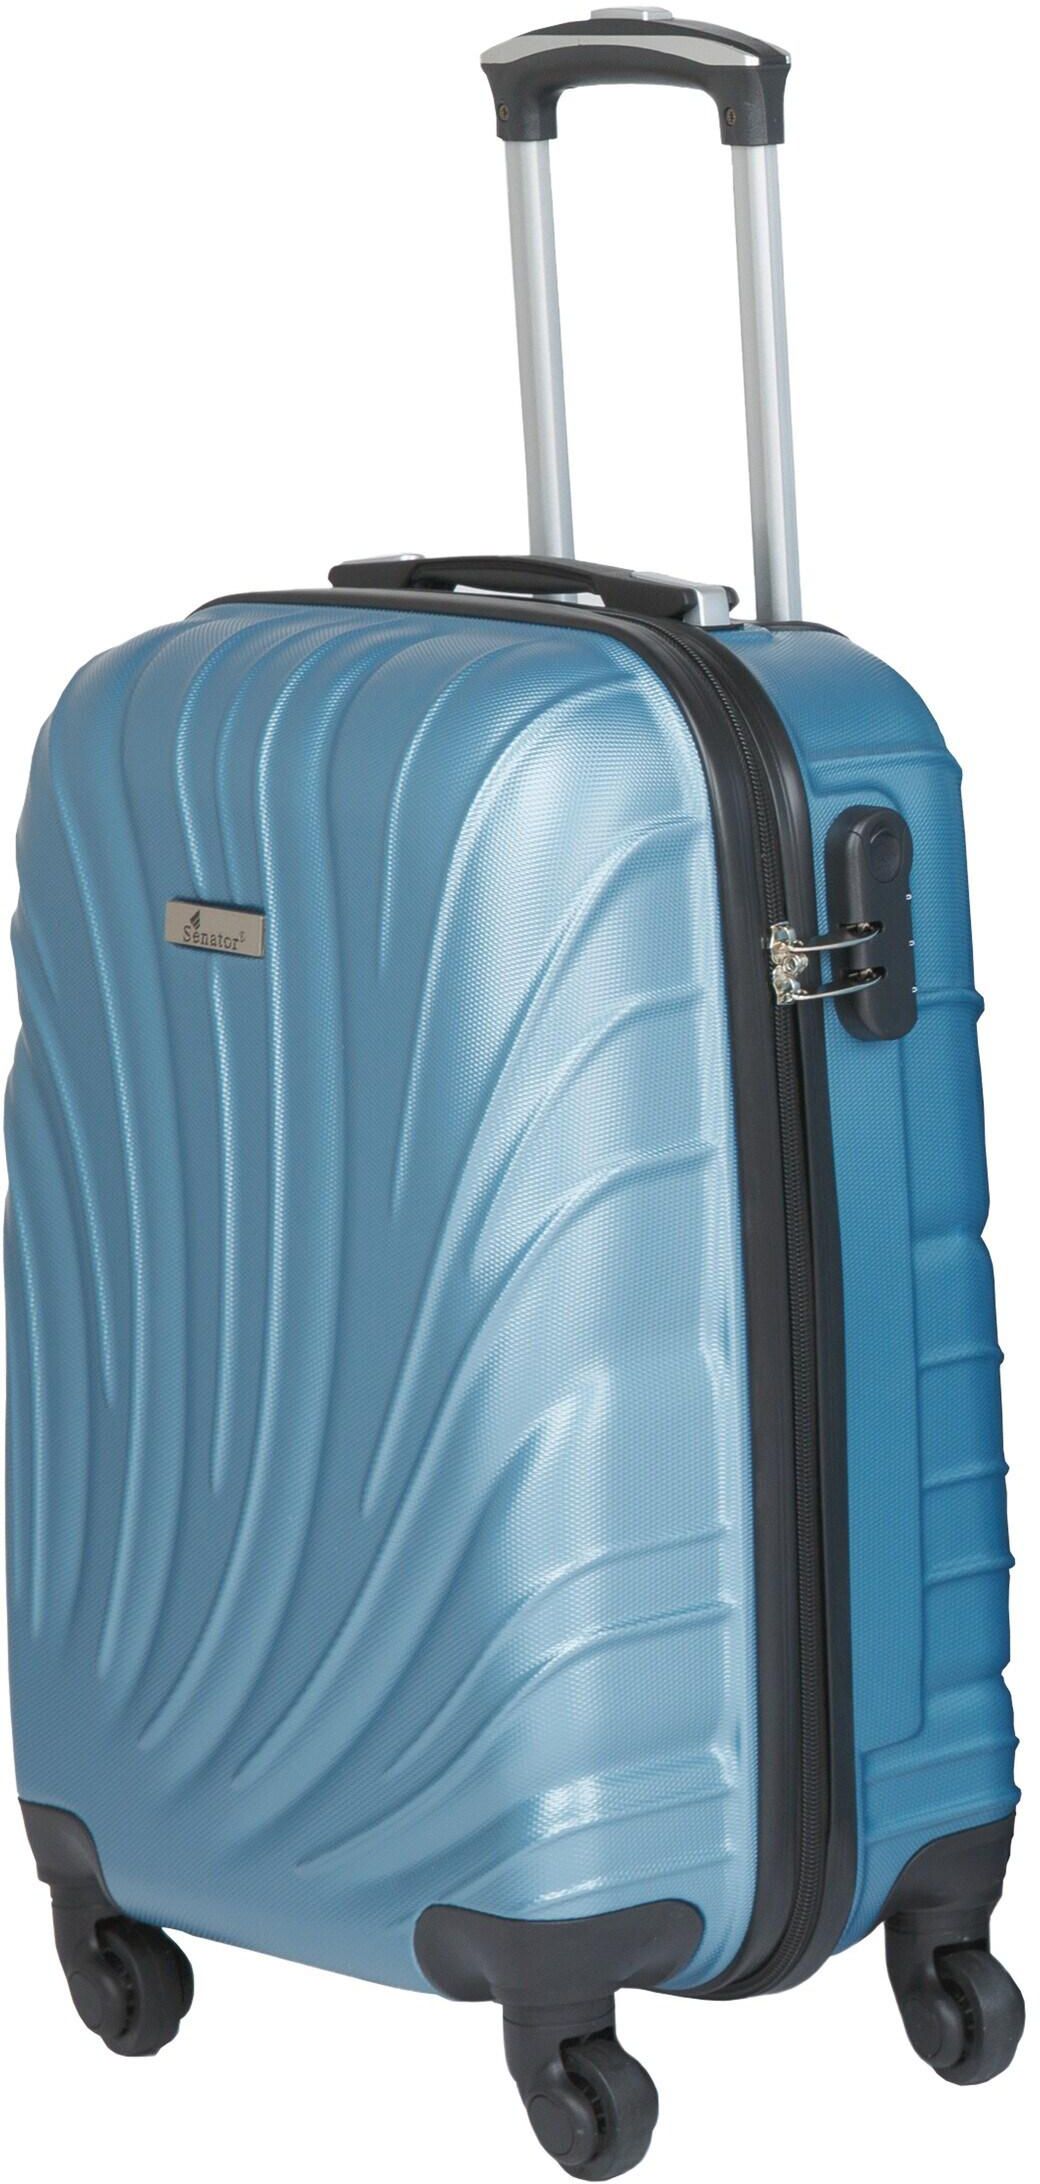 Senator Hard Case Large Luggage Trolley Suitcase for Unisex ABS Lightweight Travel Bag with 4 Spinner Wheels KH115 Light Blue